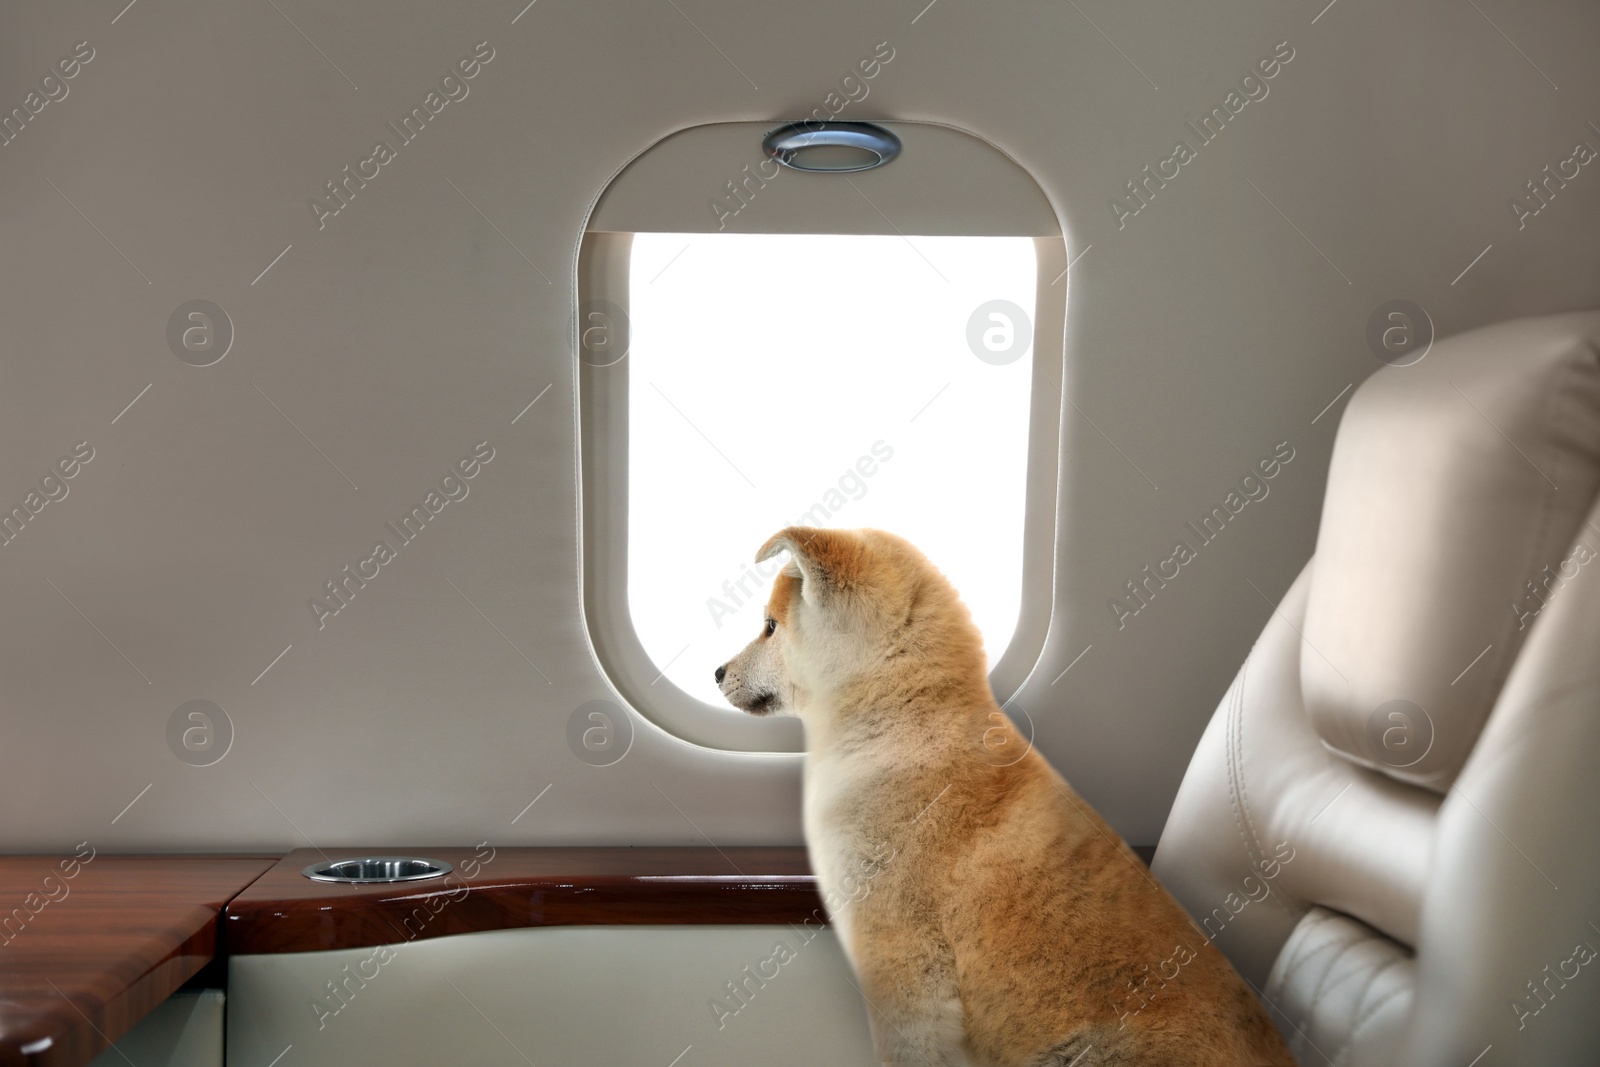 Image of Travelling with pet. Cute Akita Inu puppy near window in airplane